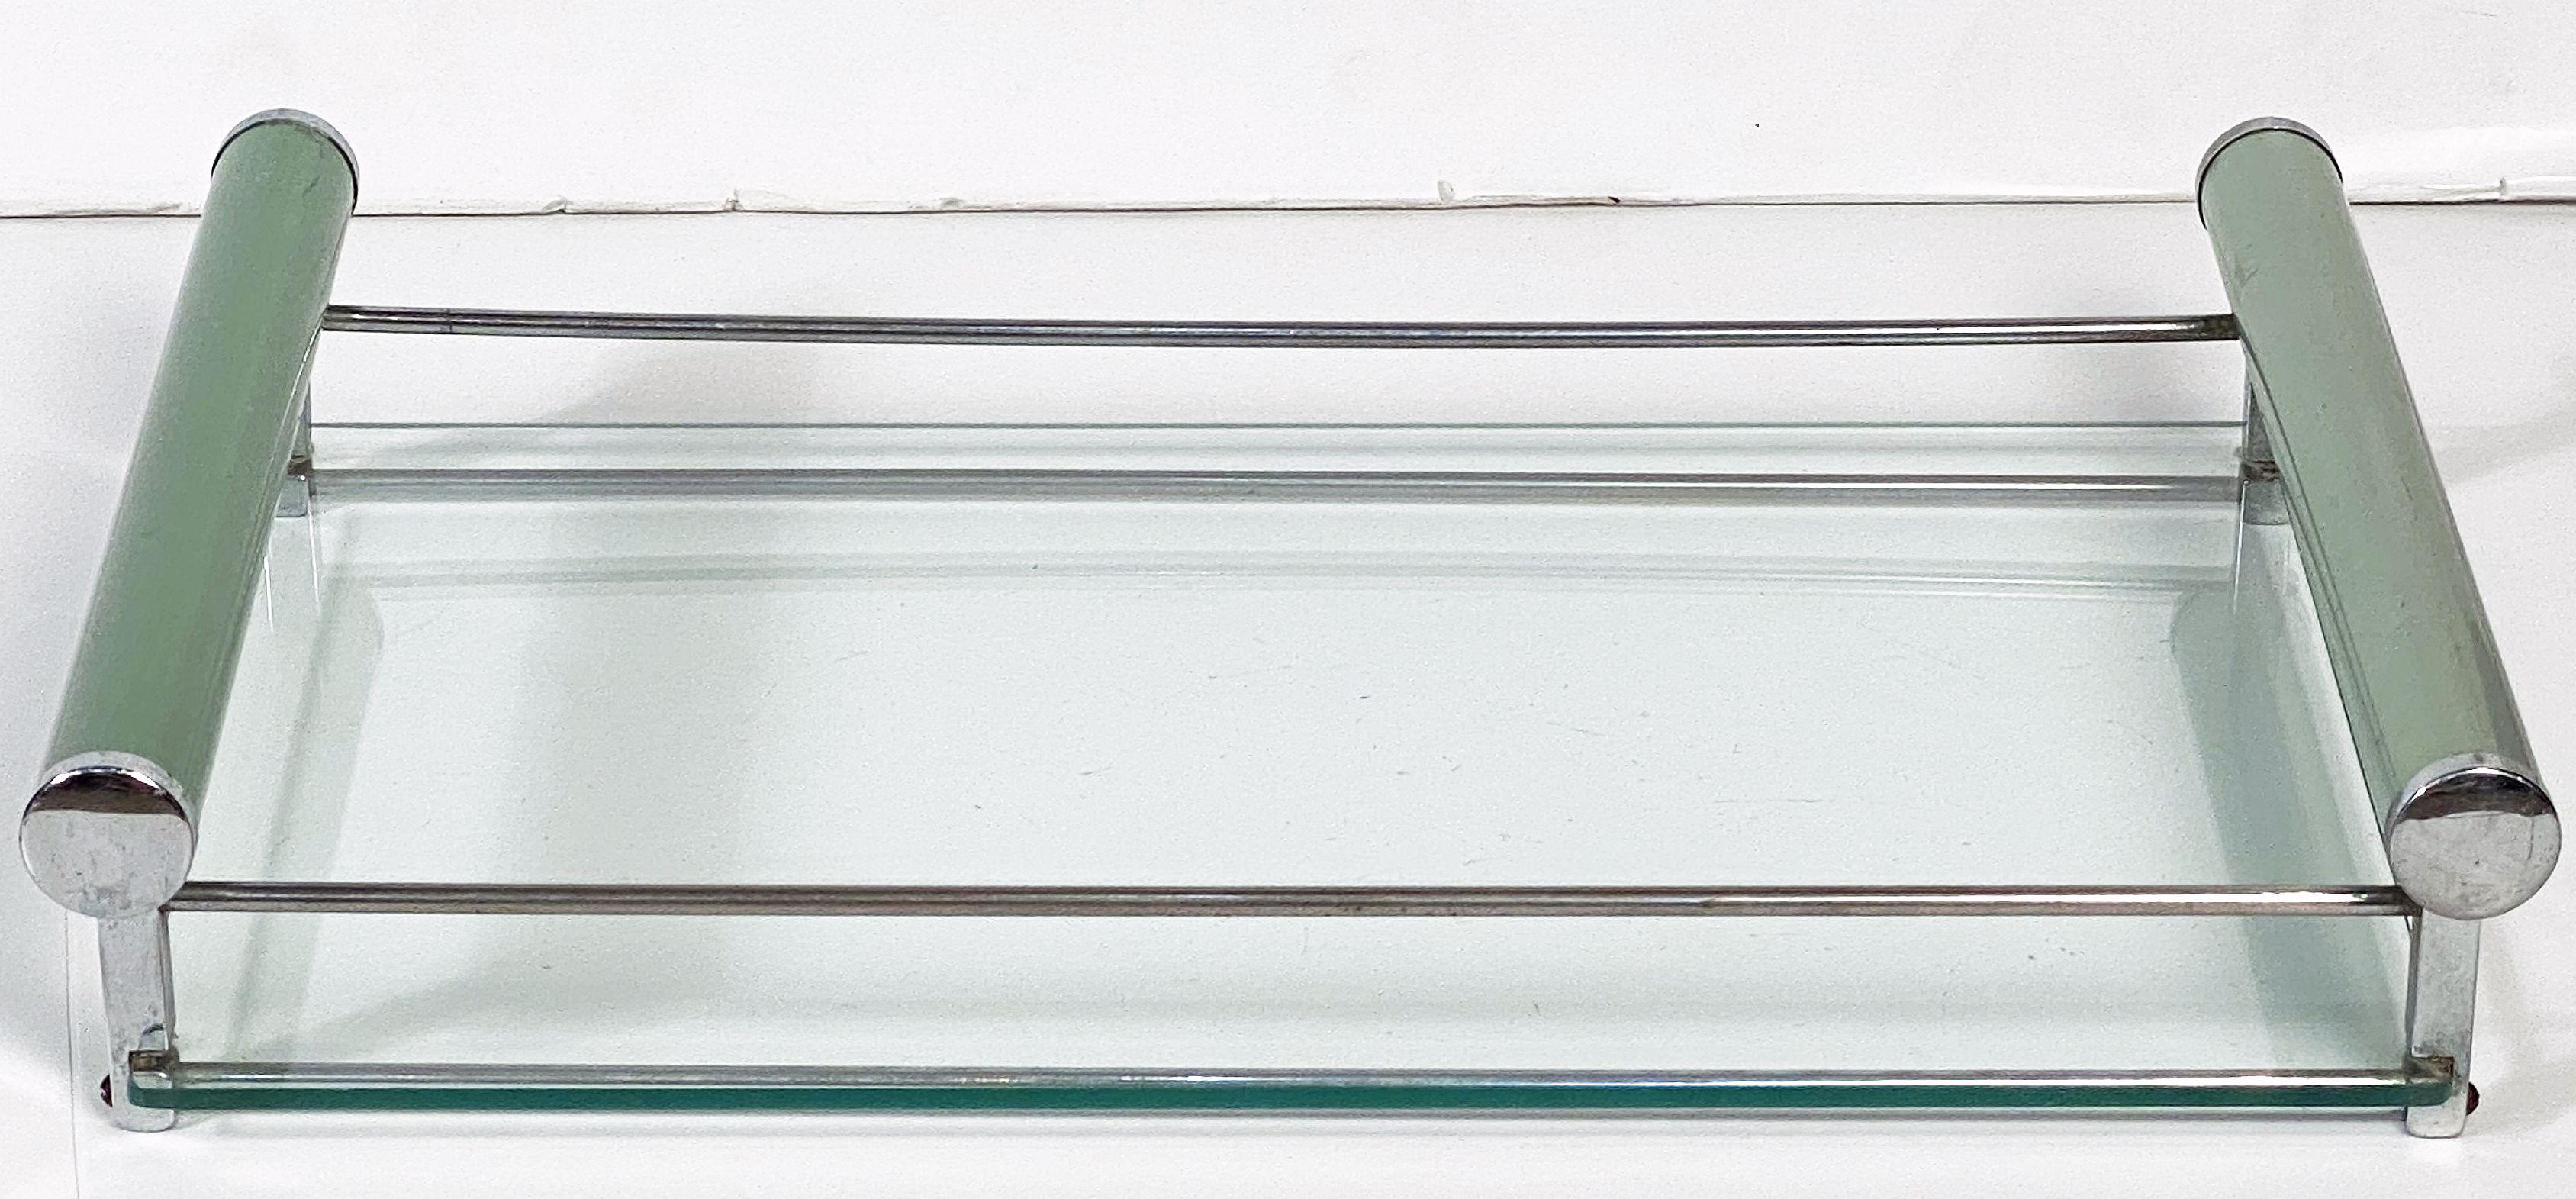 A fine period English serving tray for drinks and cocktails from the Art Deco era featuring a a chrome metal frame with an inset rectangular glass and opposing brushed green tubular metal handles.